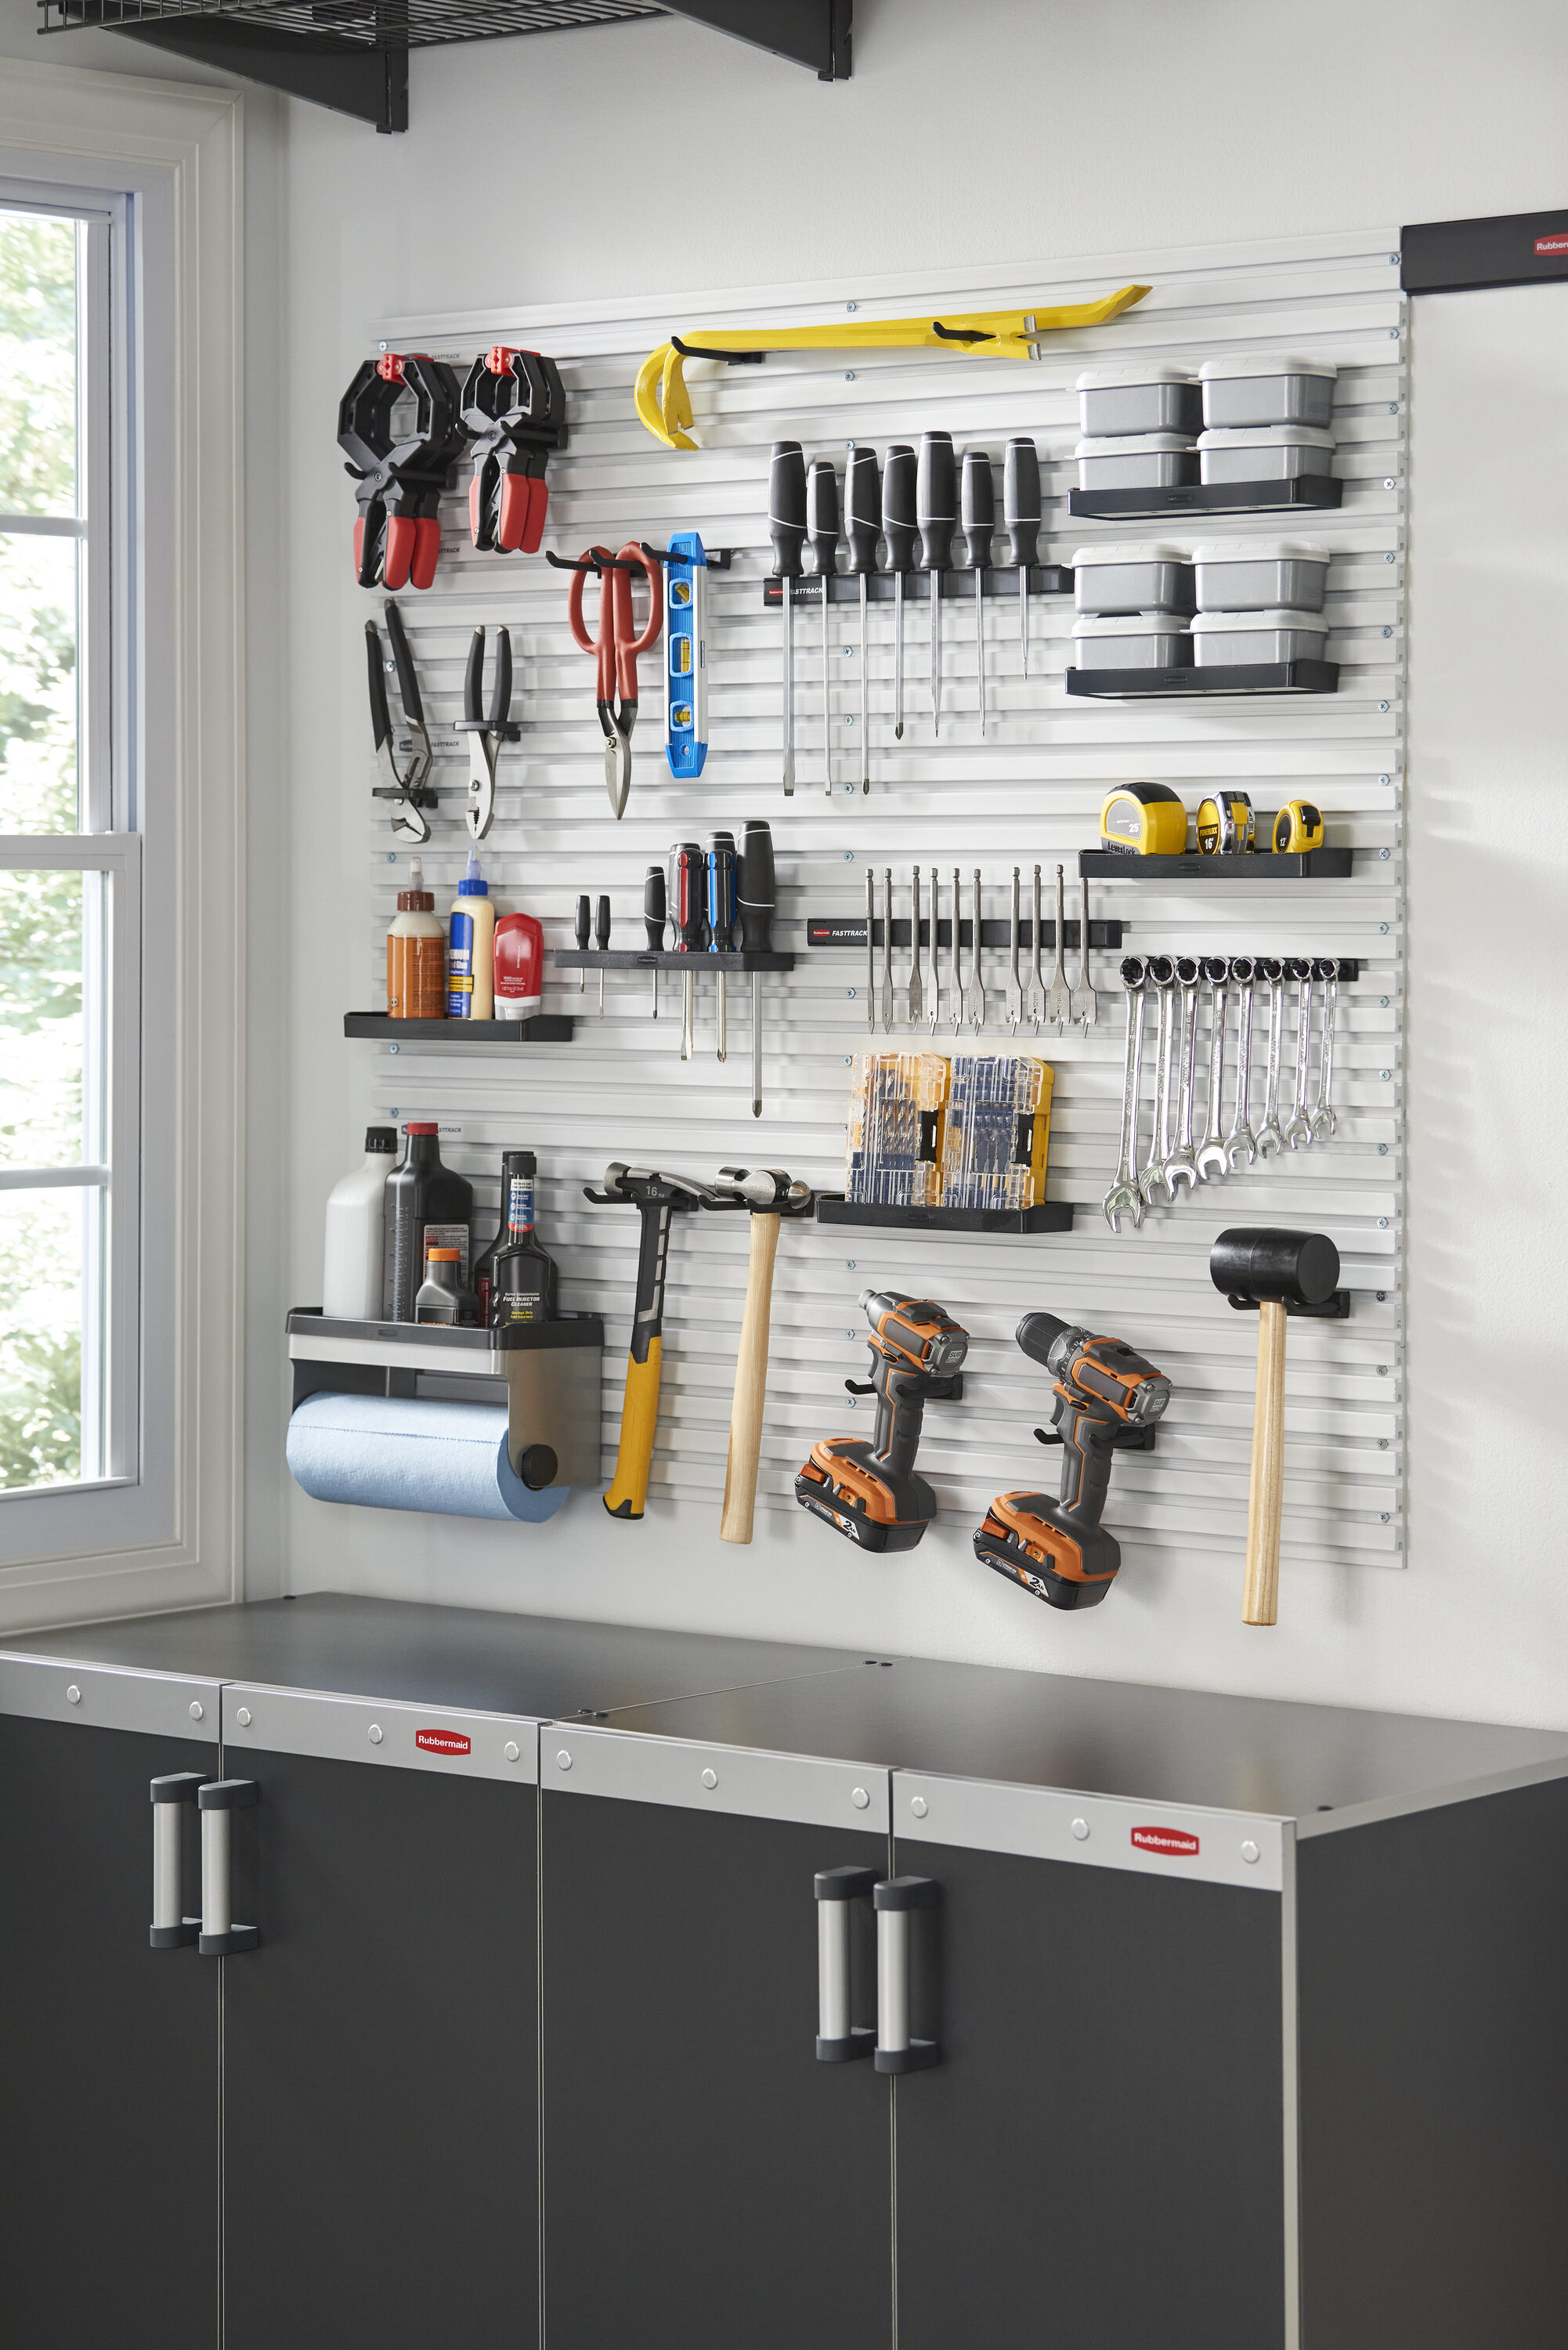 Rubbermaid Deluxe Tool Tower Garage Storage hits  low at $20 Prime  shipped